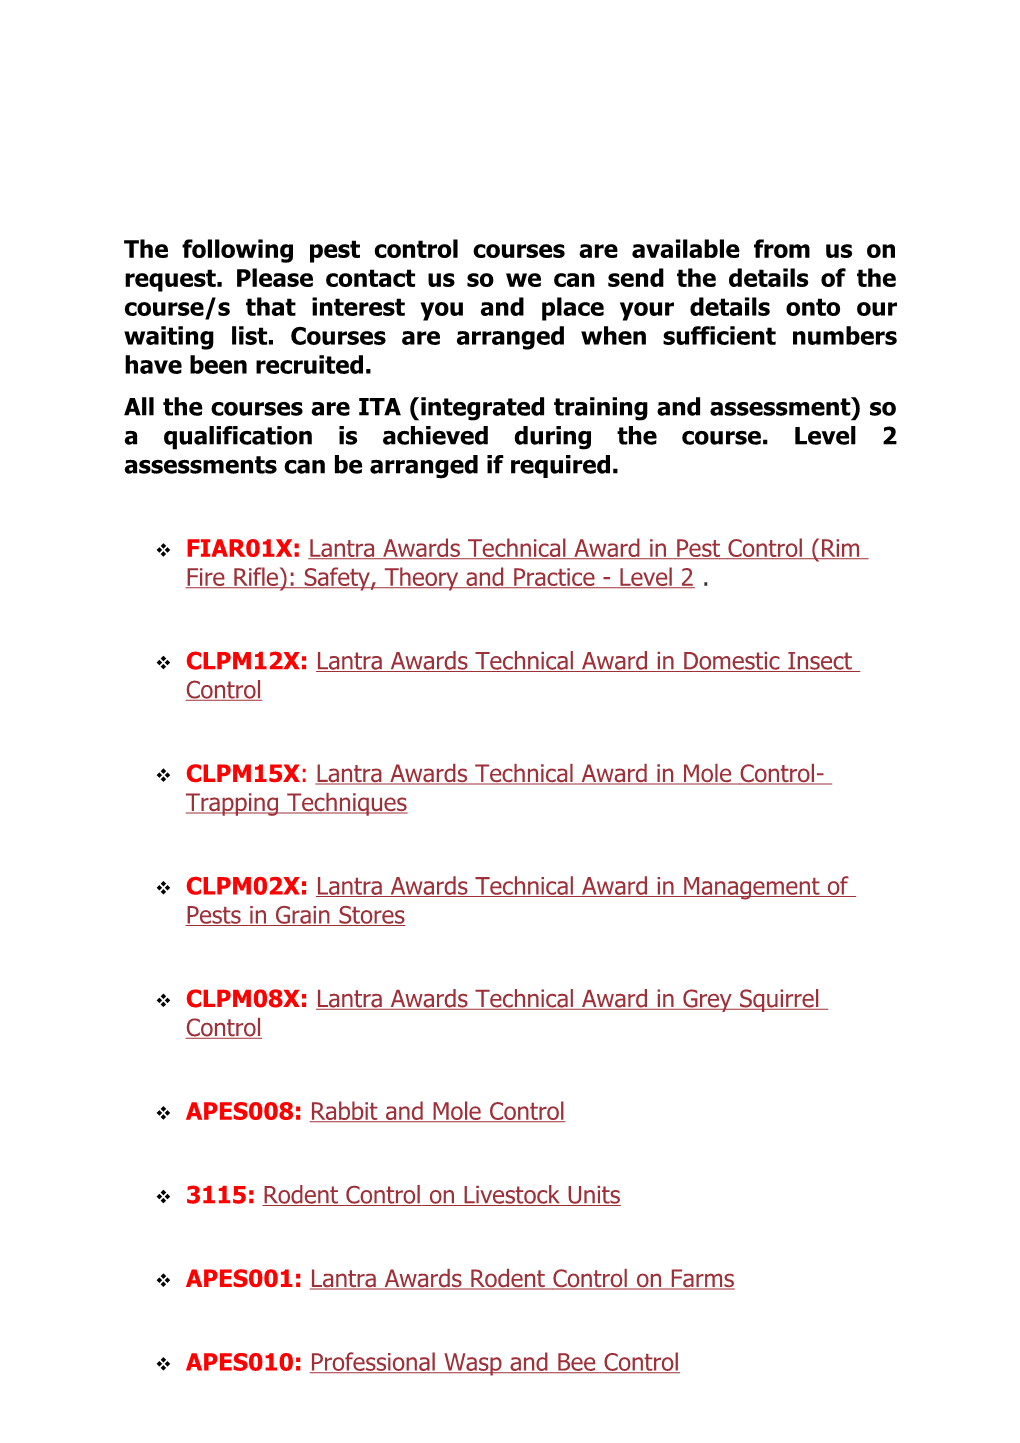 The Following Pest Control Courses Are Available from Us on Request. Please Contact Us